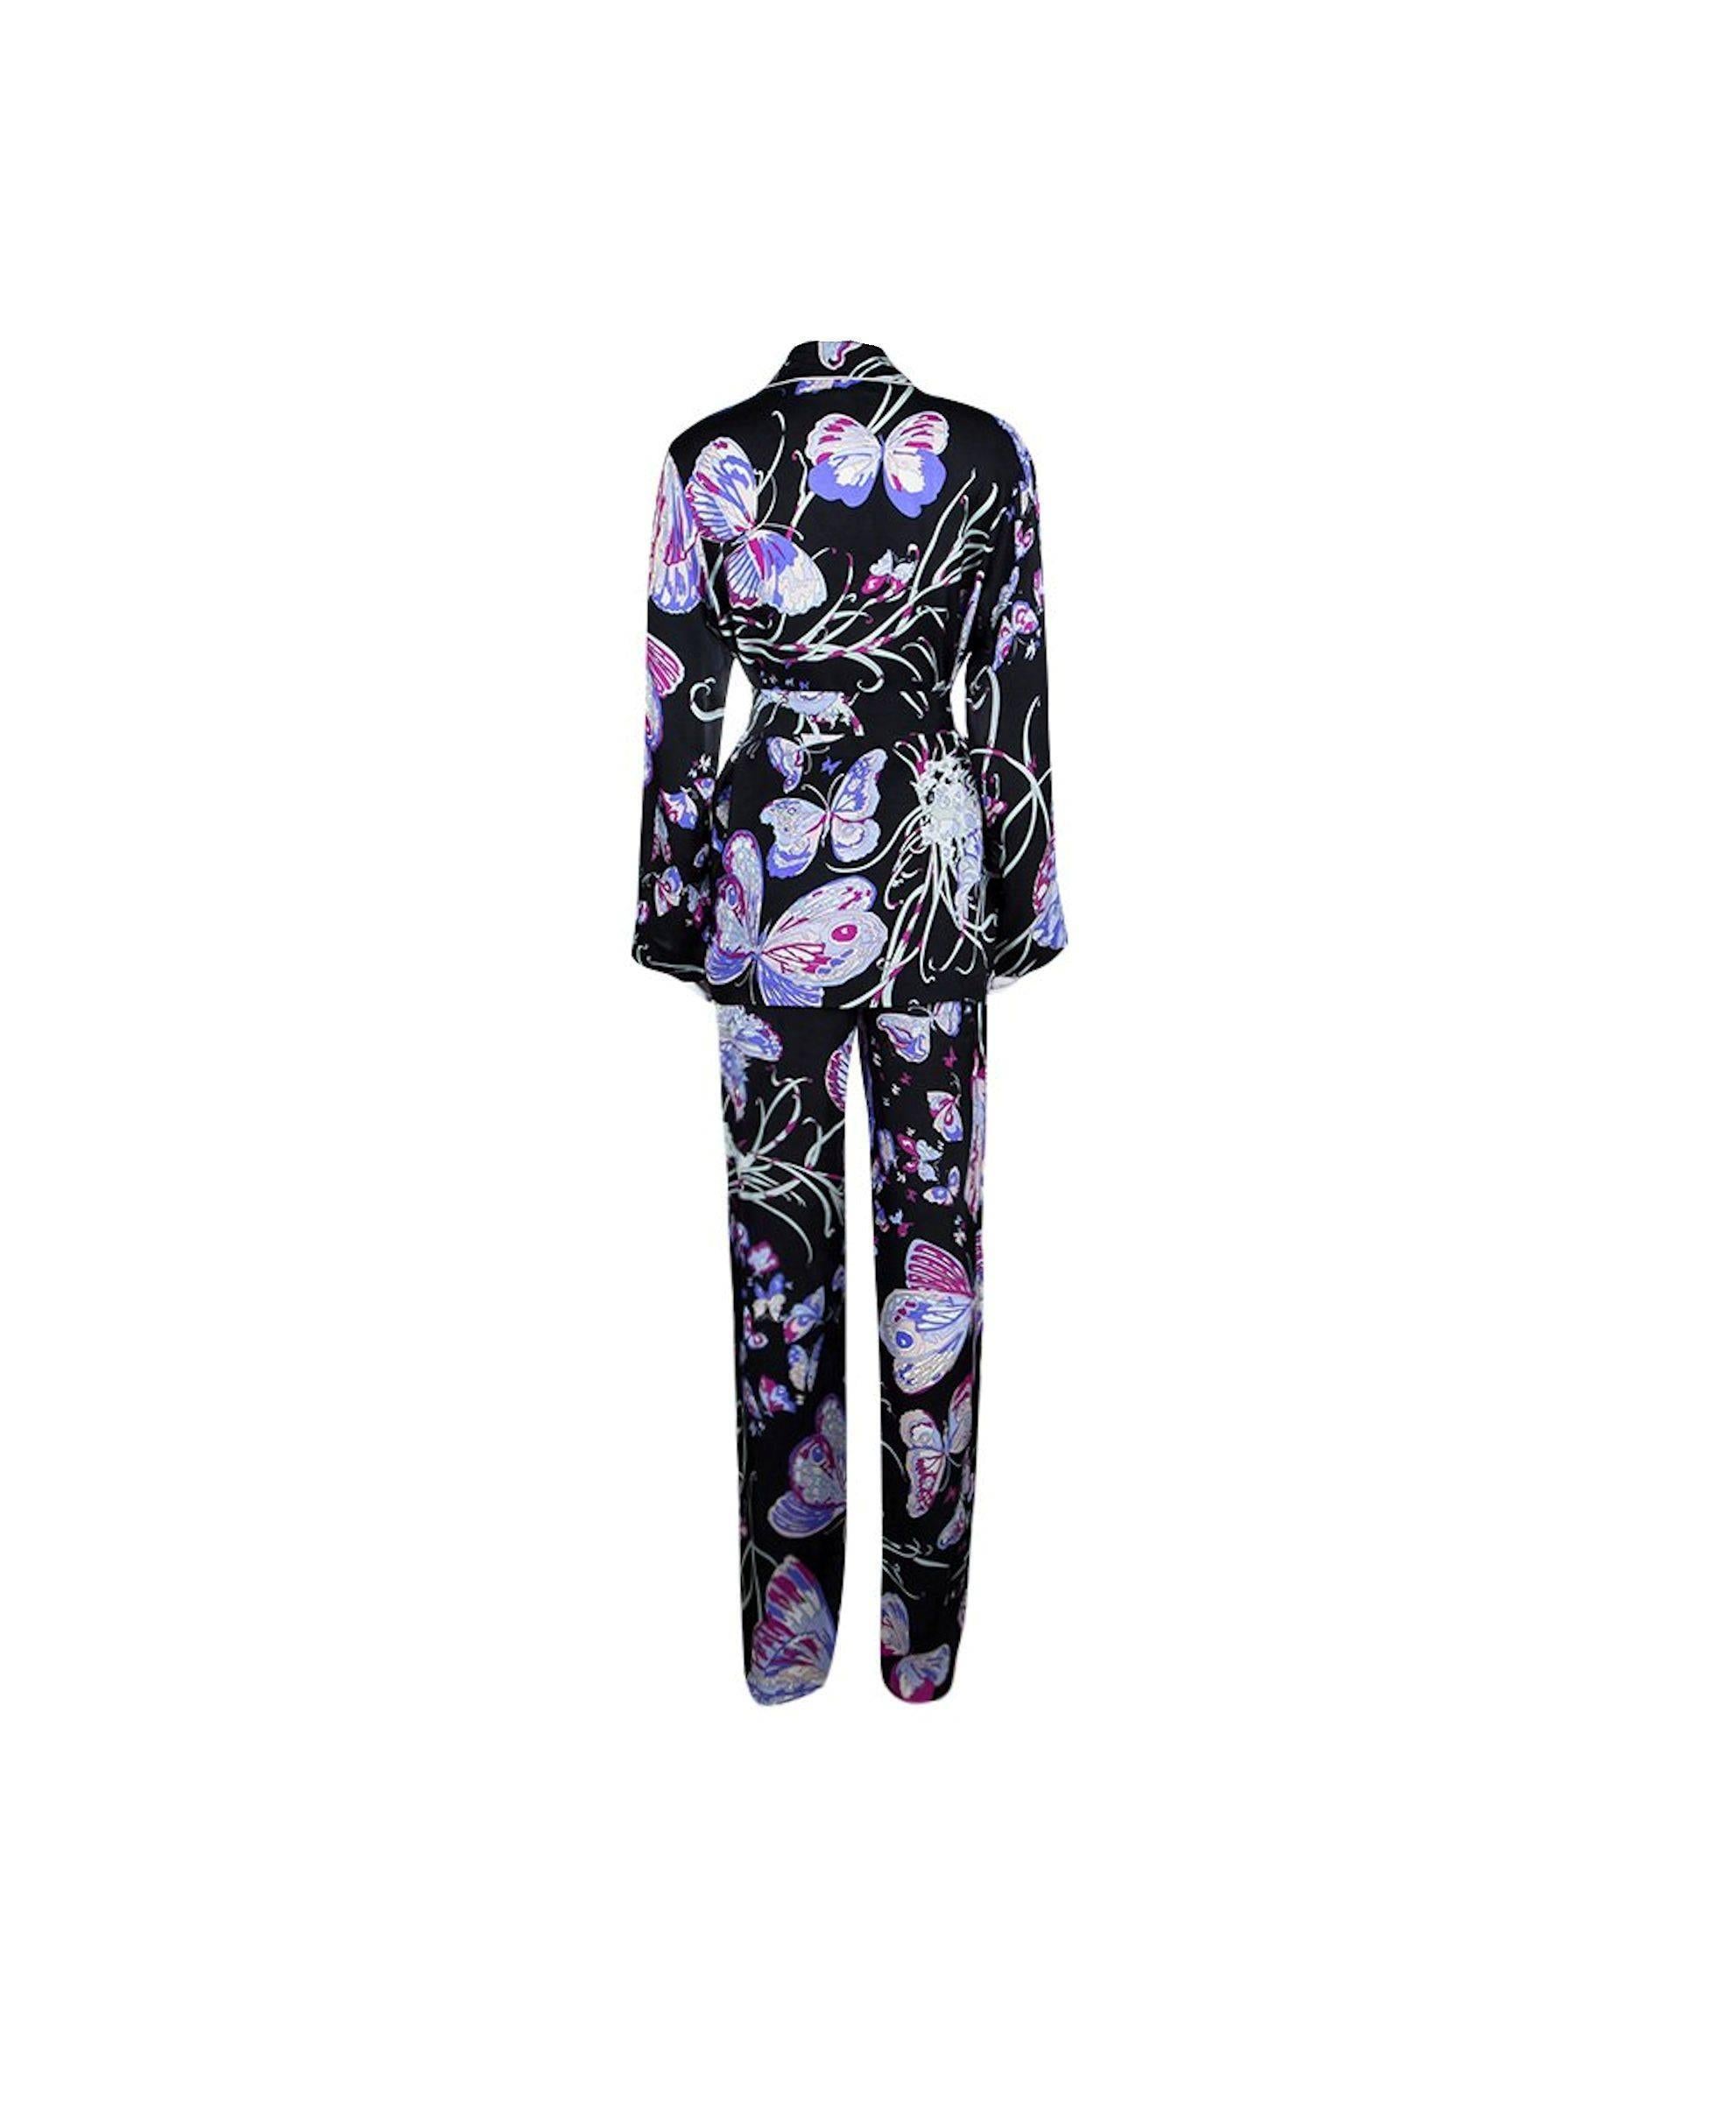   Beautiful EMILIO PUCCI print silk pants suit 
    Signature piece with the timeless EMILIO PUCCI print
    Stunning butterfly print, 